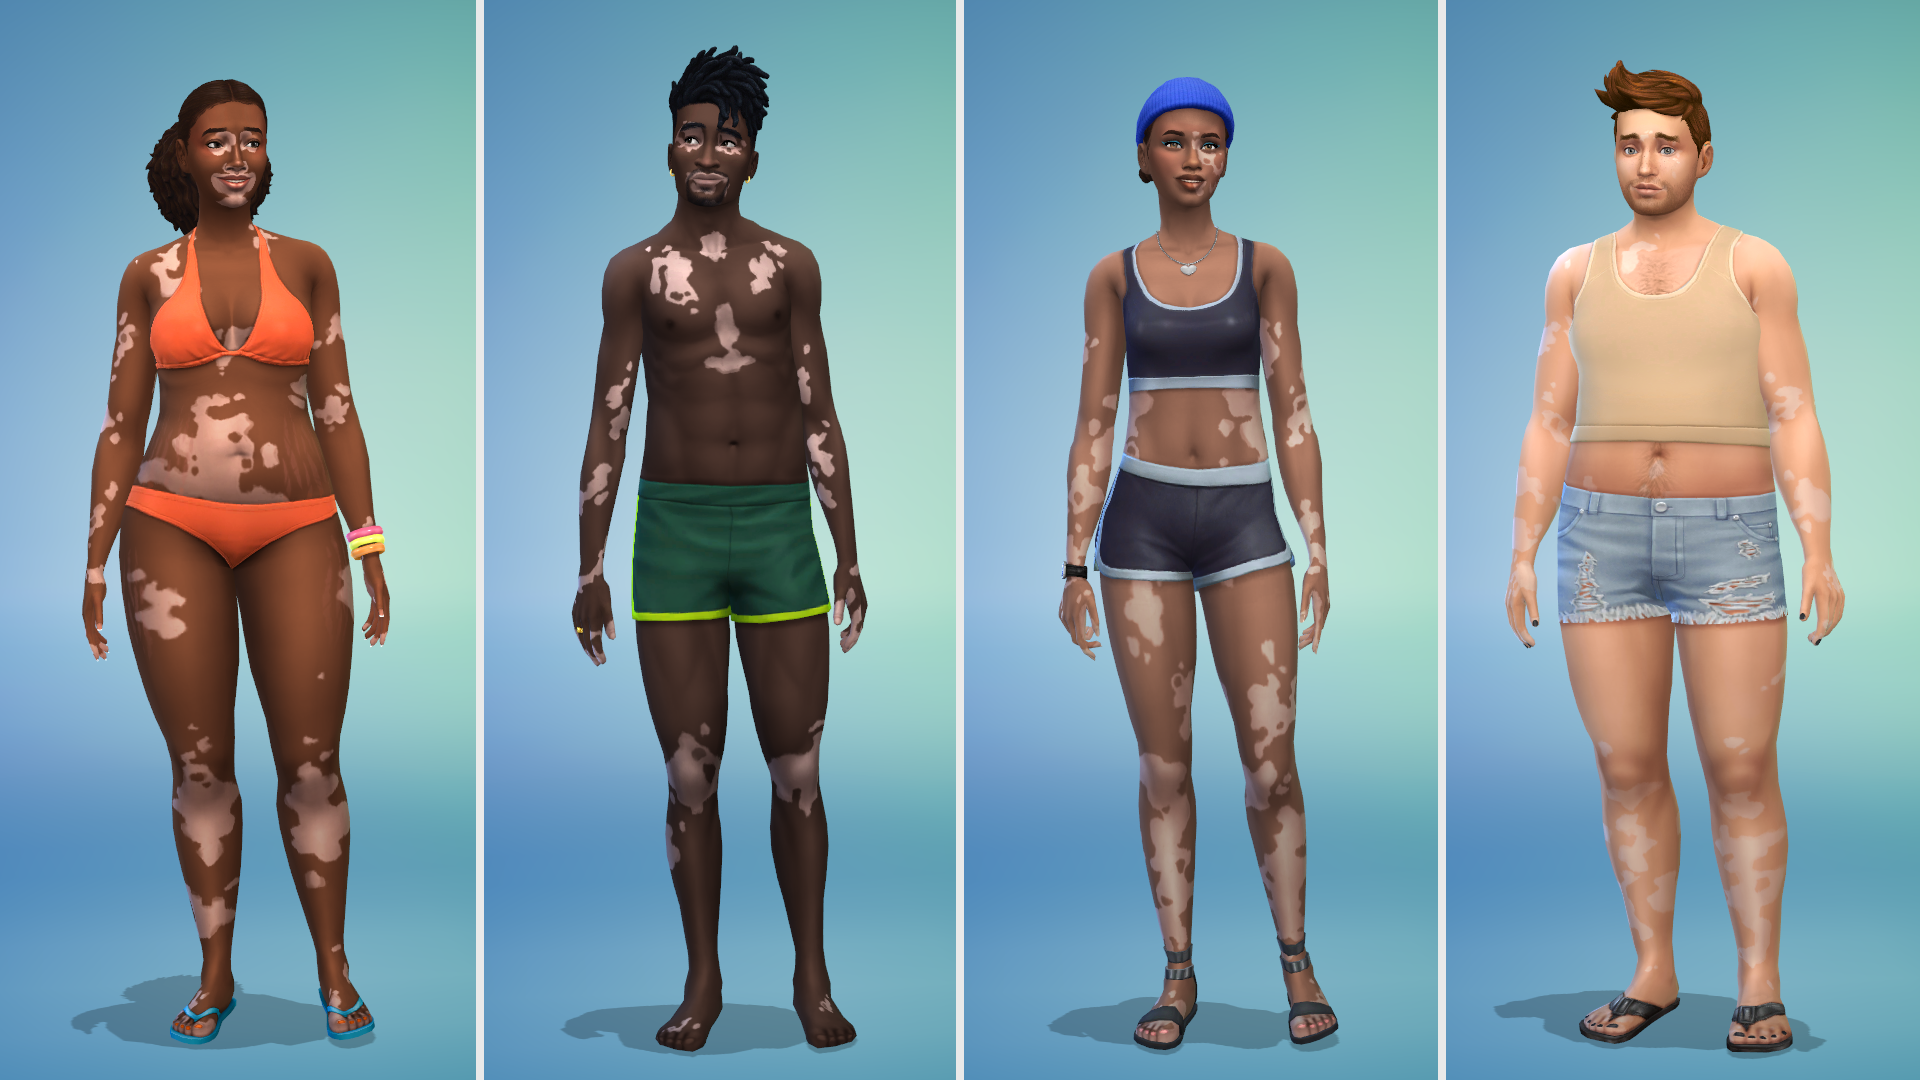 The Sims 4' now lets players add vitiligo skin features to their Sims